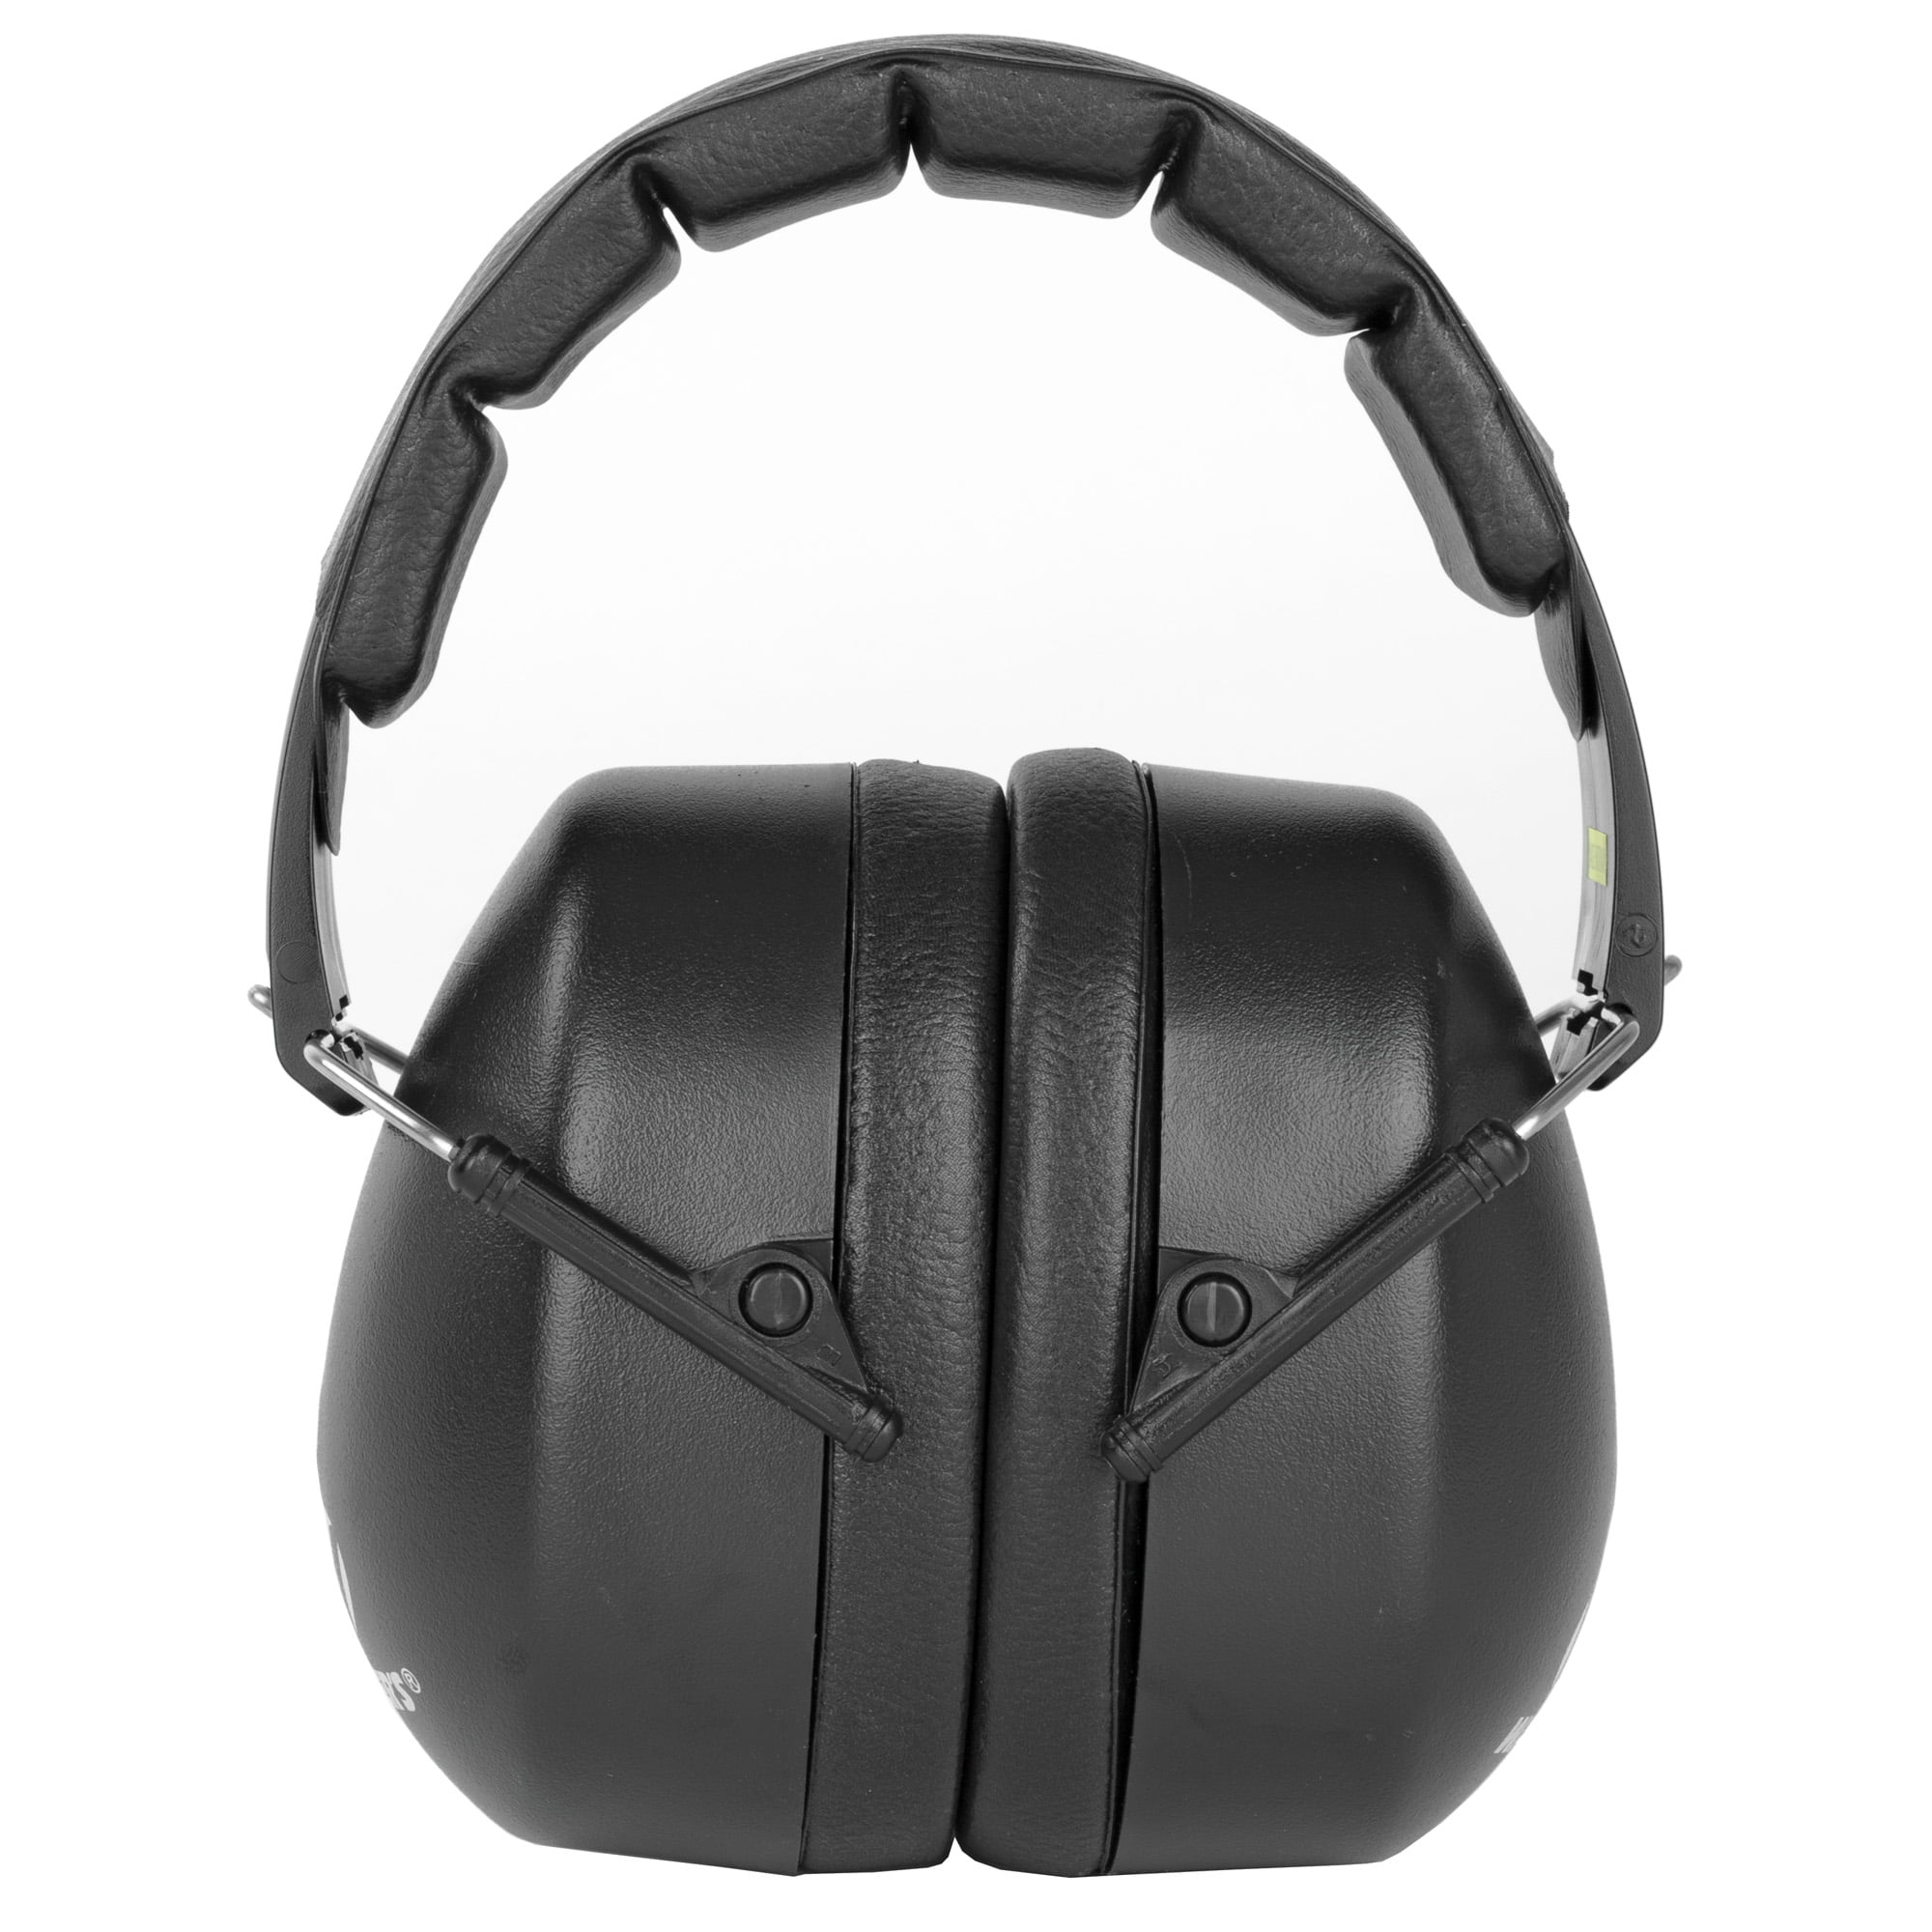 Walkers Game Ear EXT Range Shooting Folding Muff Padded Protect Muffs Gwp-exfm3 for sale online 